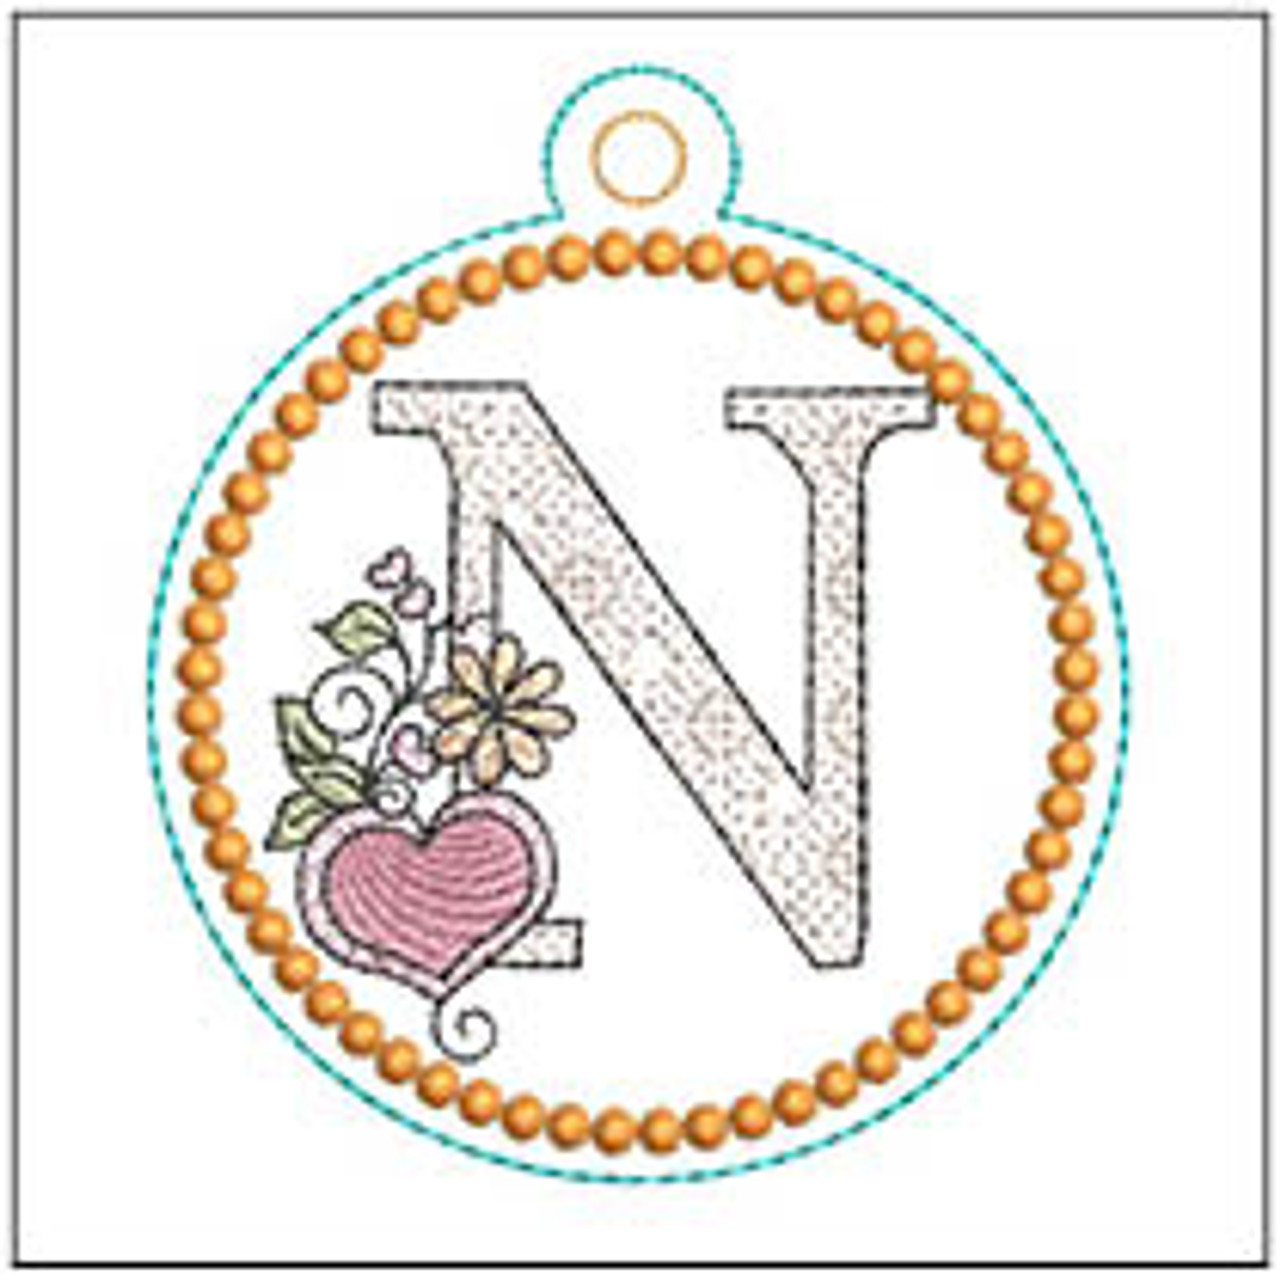 Embroider A Cute Pocket Heart Key Chain – Design File Included